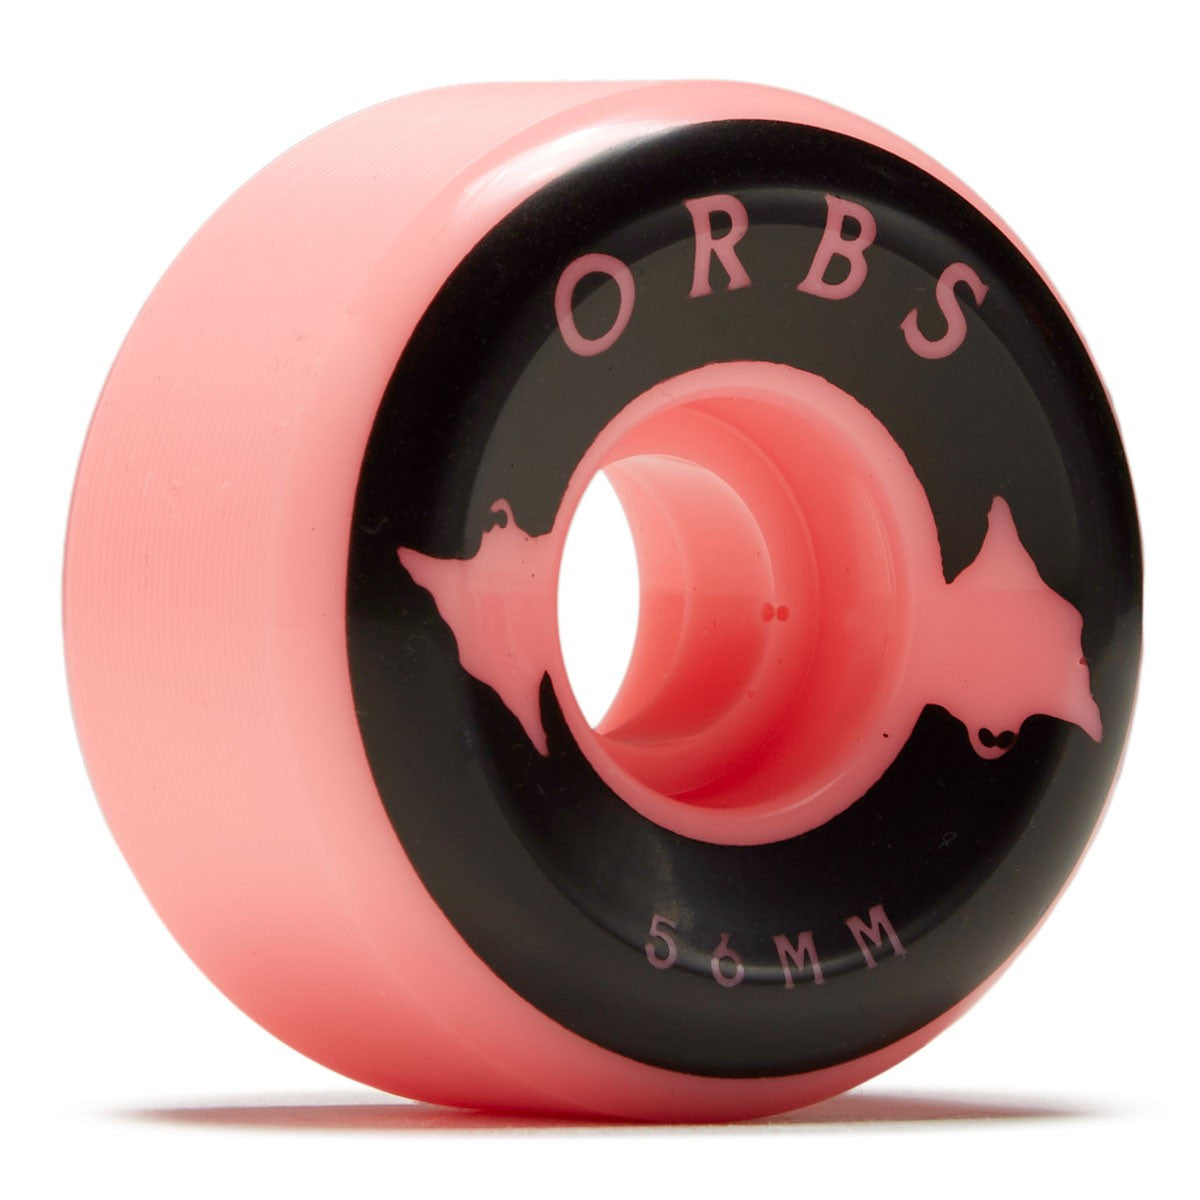 ORBS WHEELS SPECTERS CORAL WHEELS 99A (56MM) - The Drive Skateshop